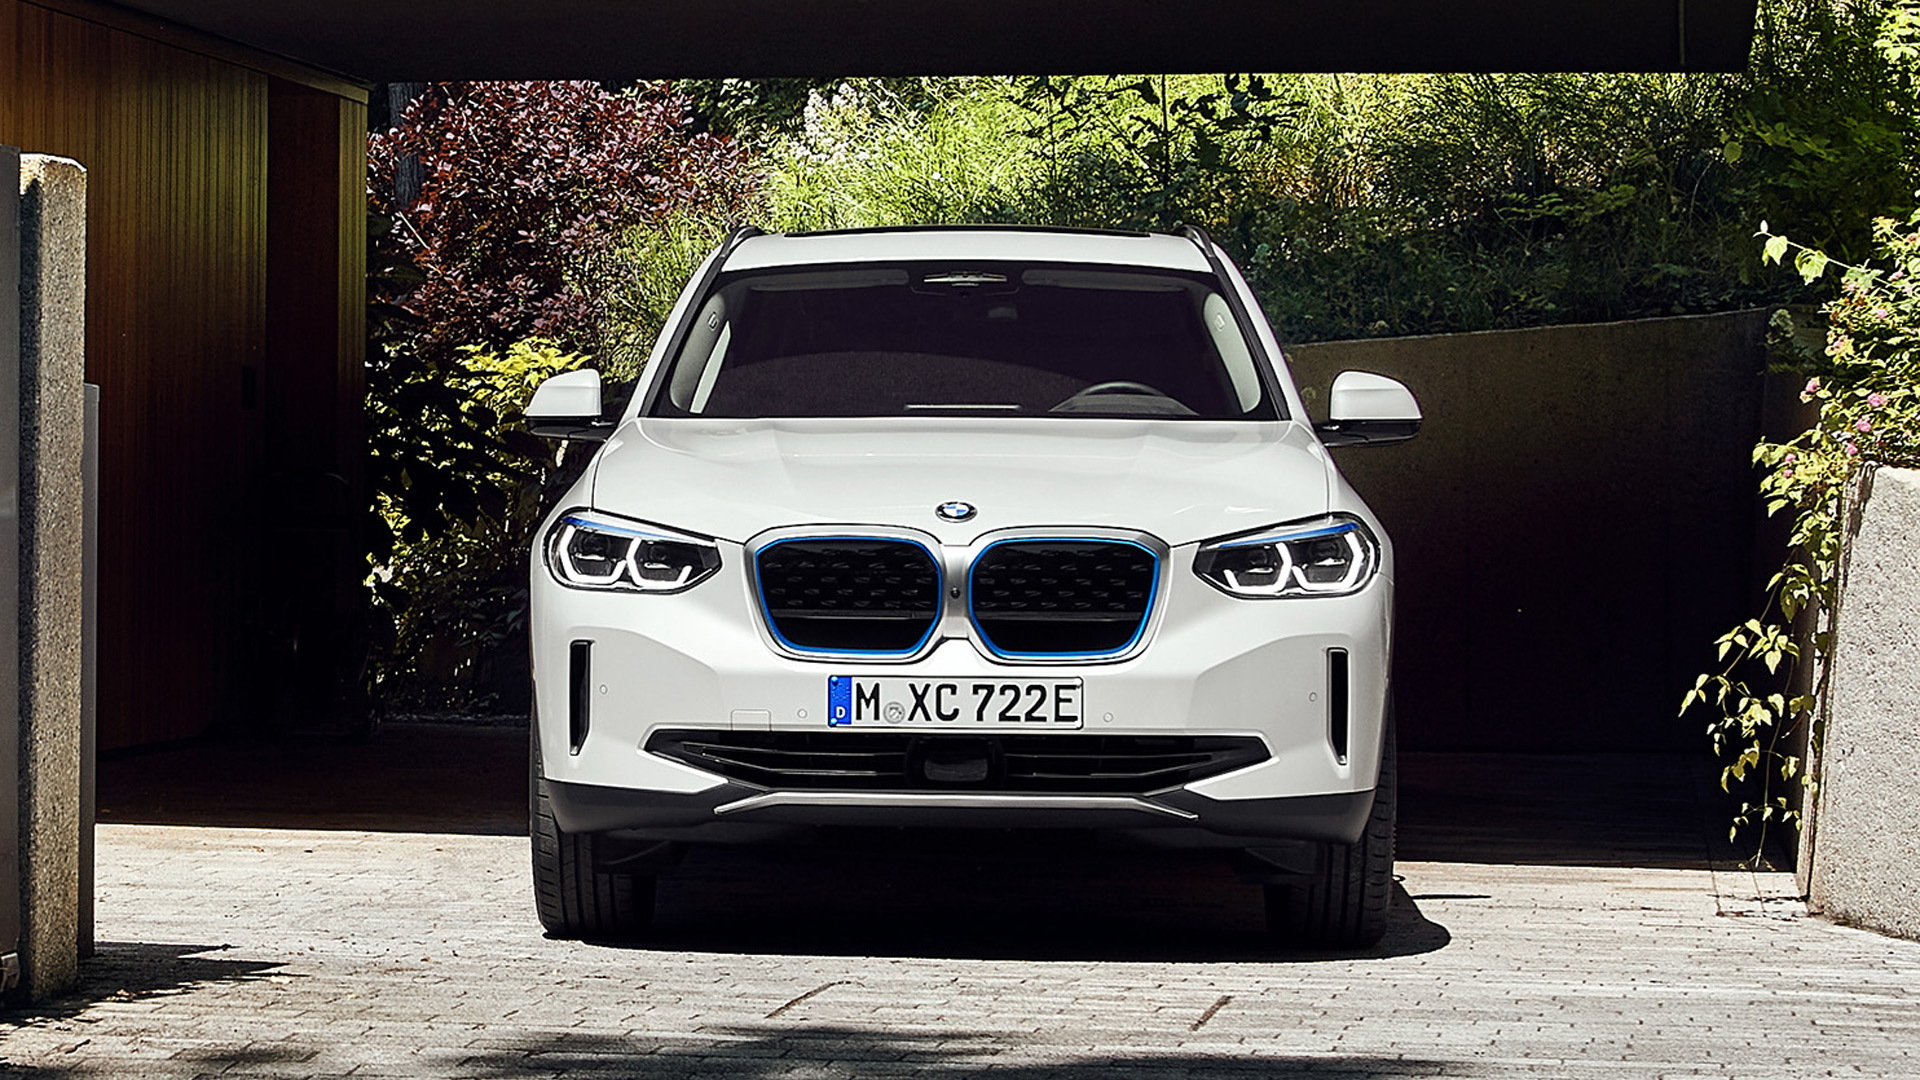 2021 BMW iX3 electric SUV: range, charging time and 